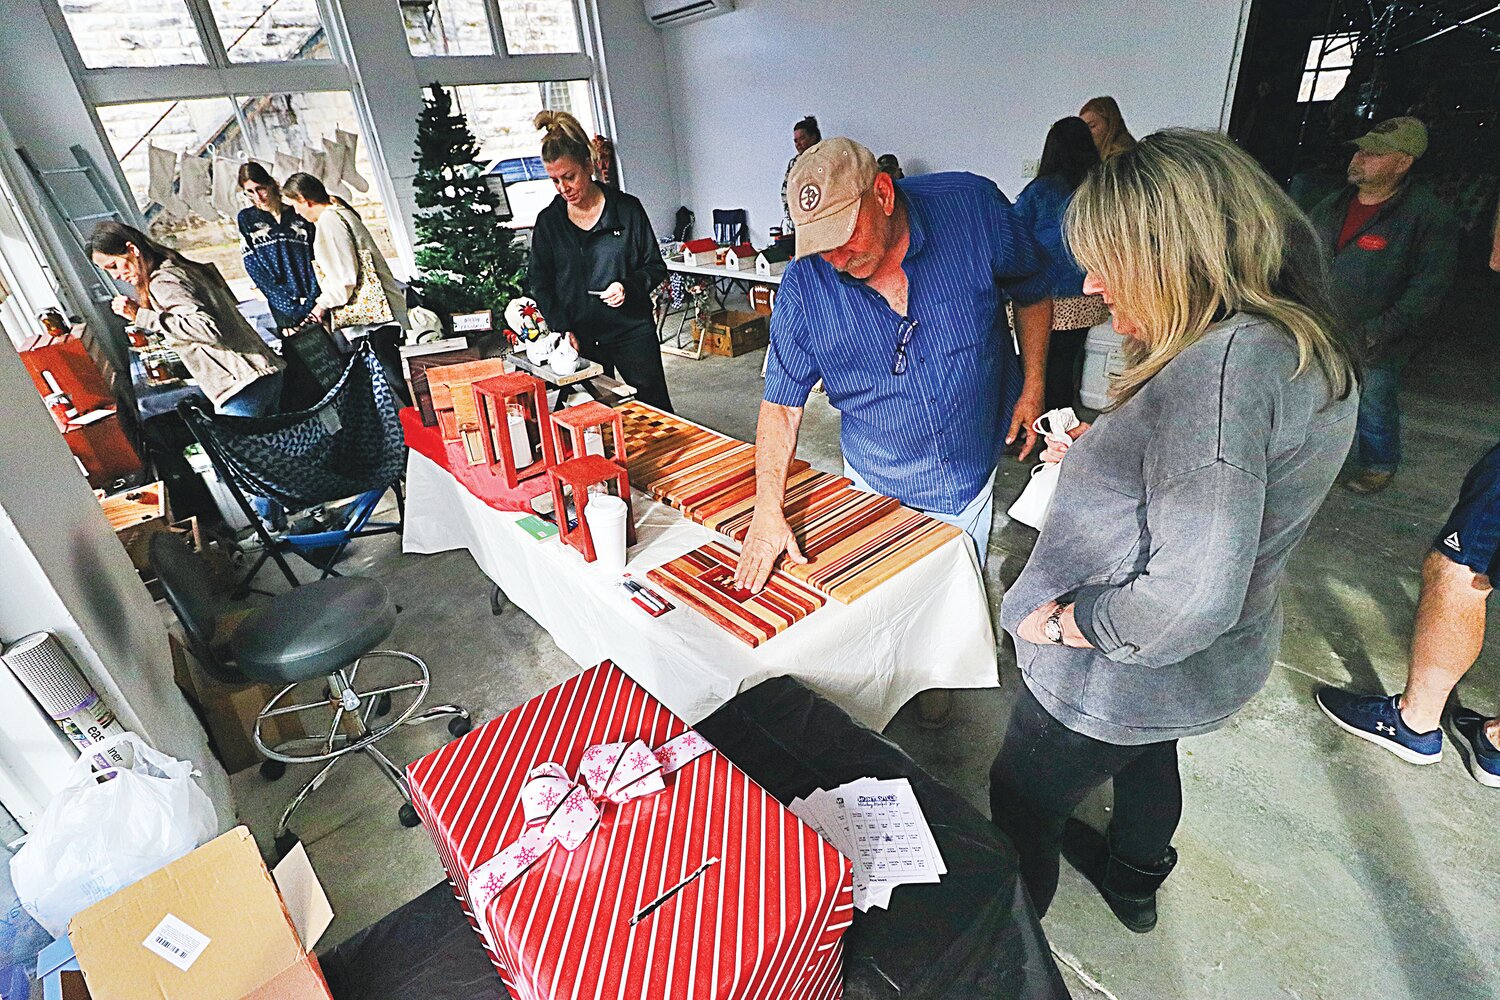 Shoppers browse the many offerings available at Holiday Market.